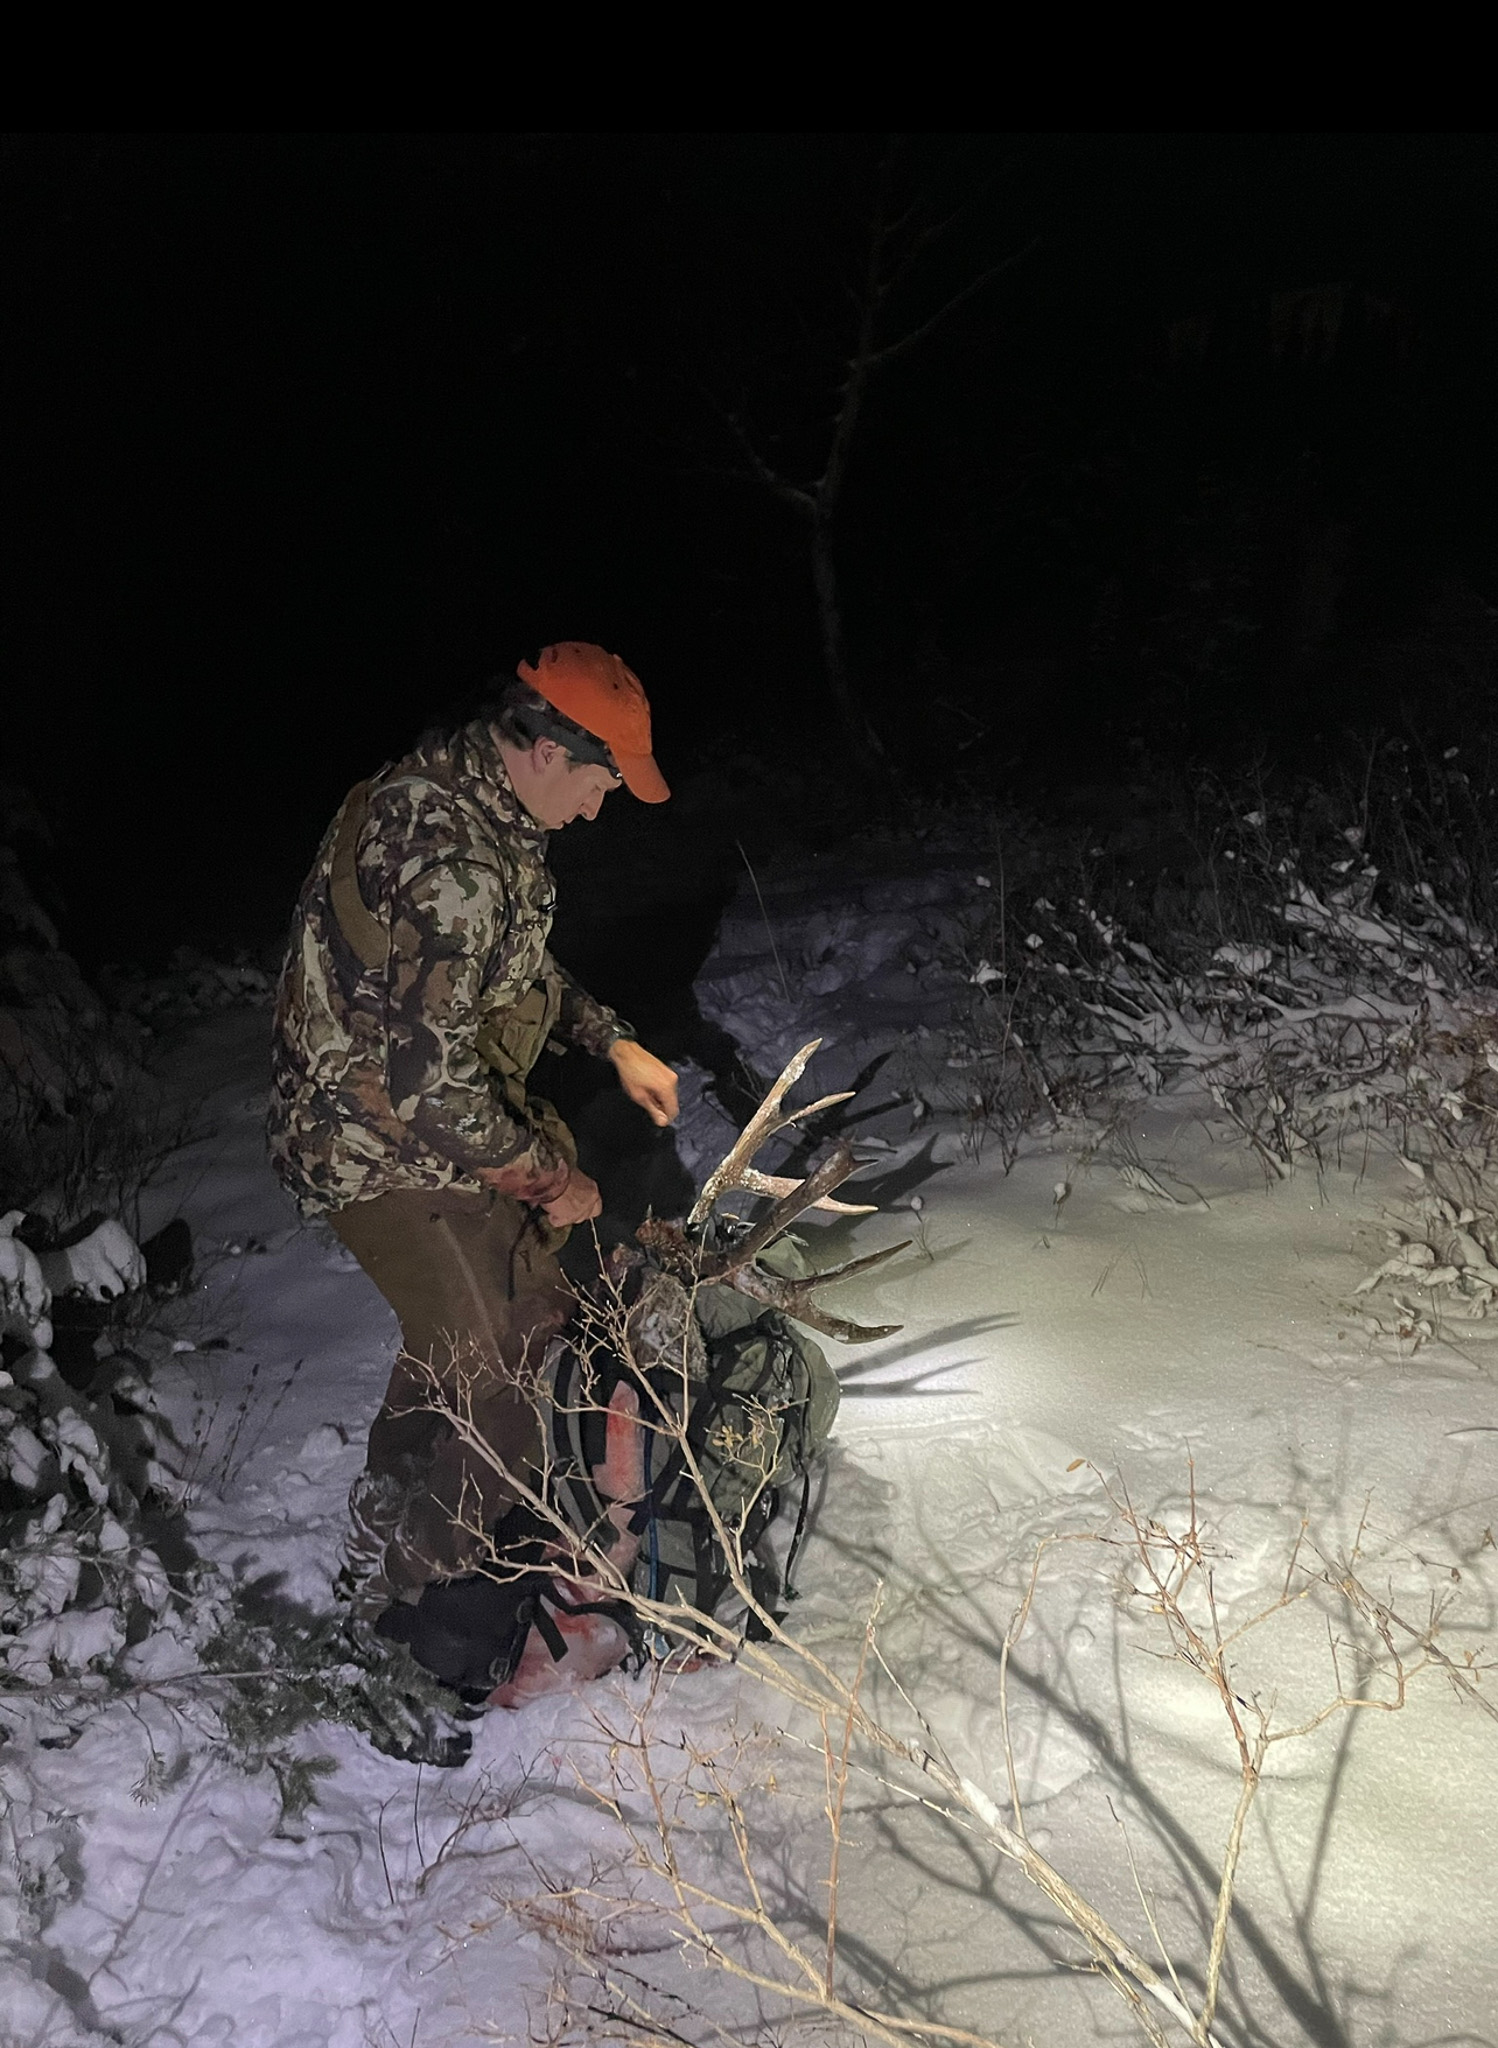 A hunter secures his deer to his pack in the dark.